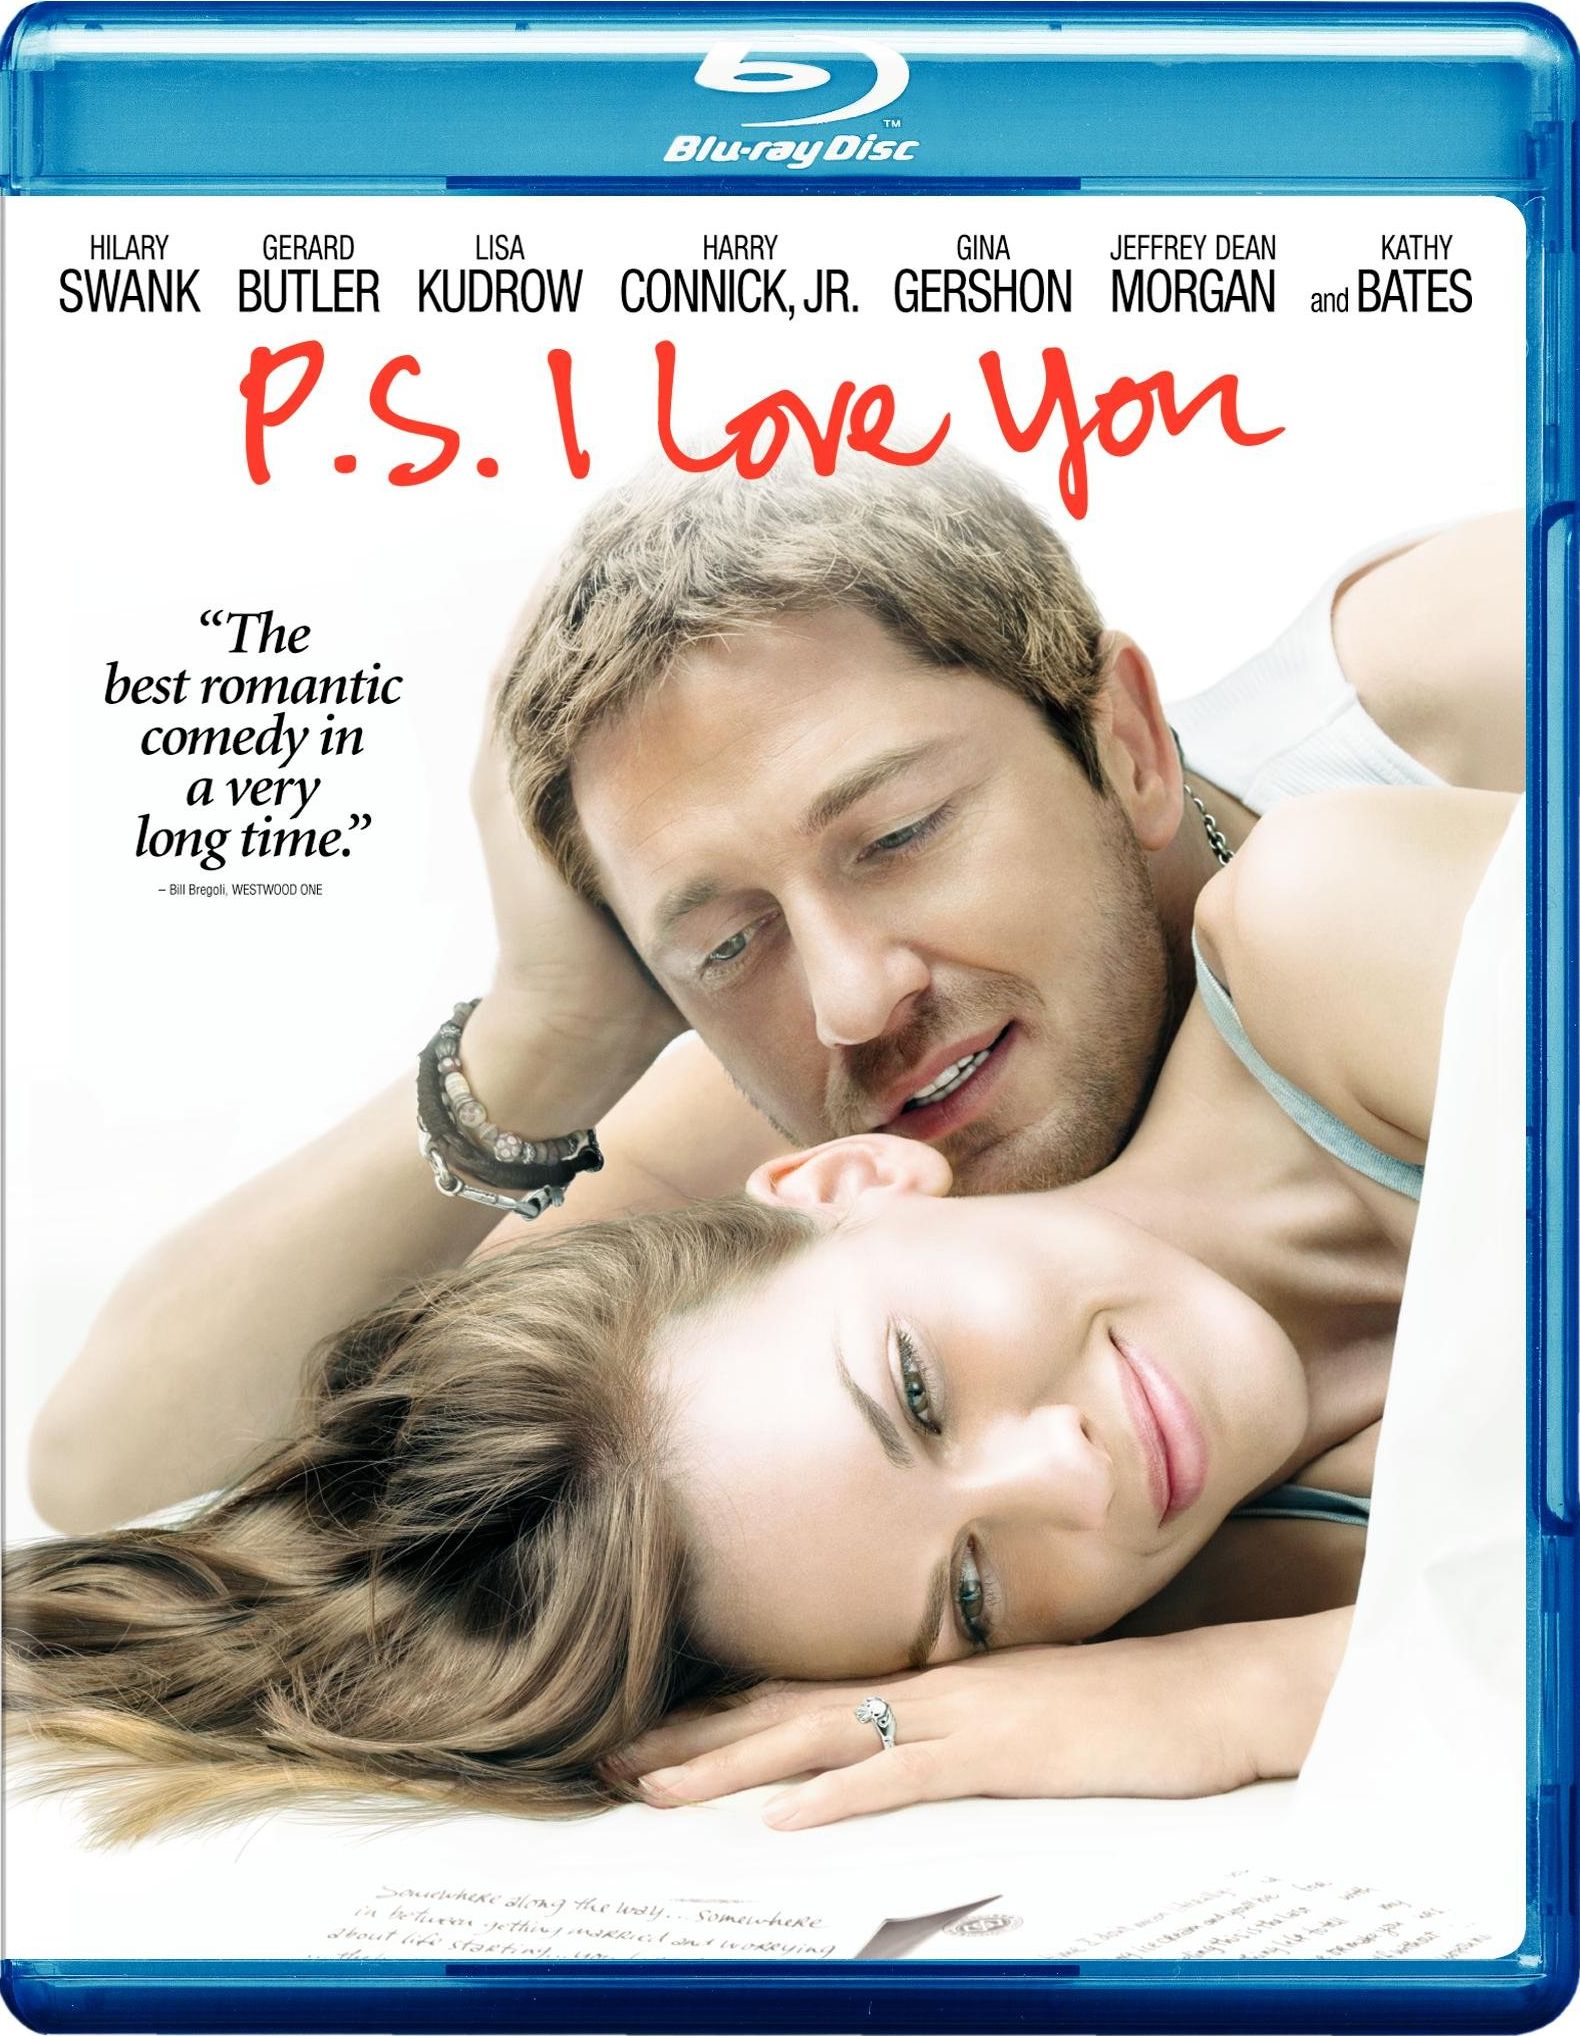 P.S. I Love You DVD Release Date May 6, 2008